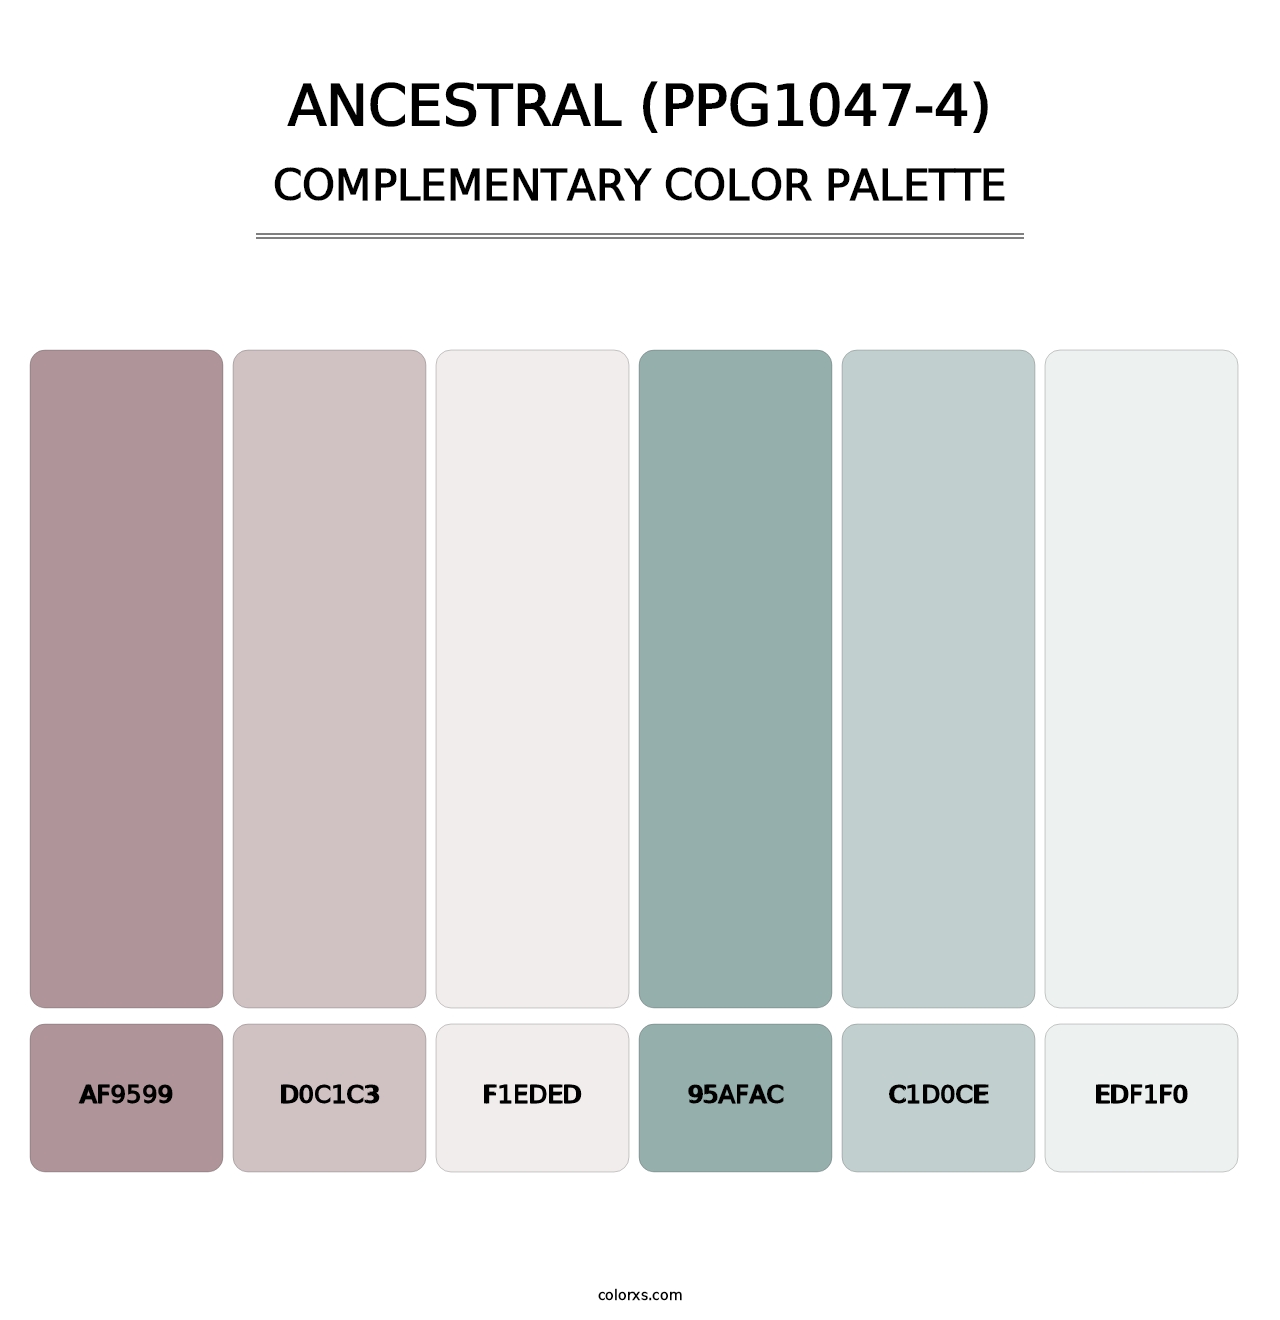 Ancestral (PPG1047-4) - Complementary Color Palette